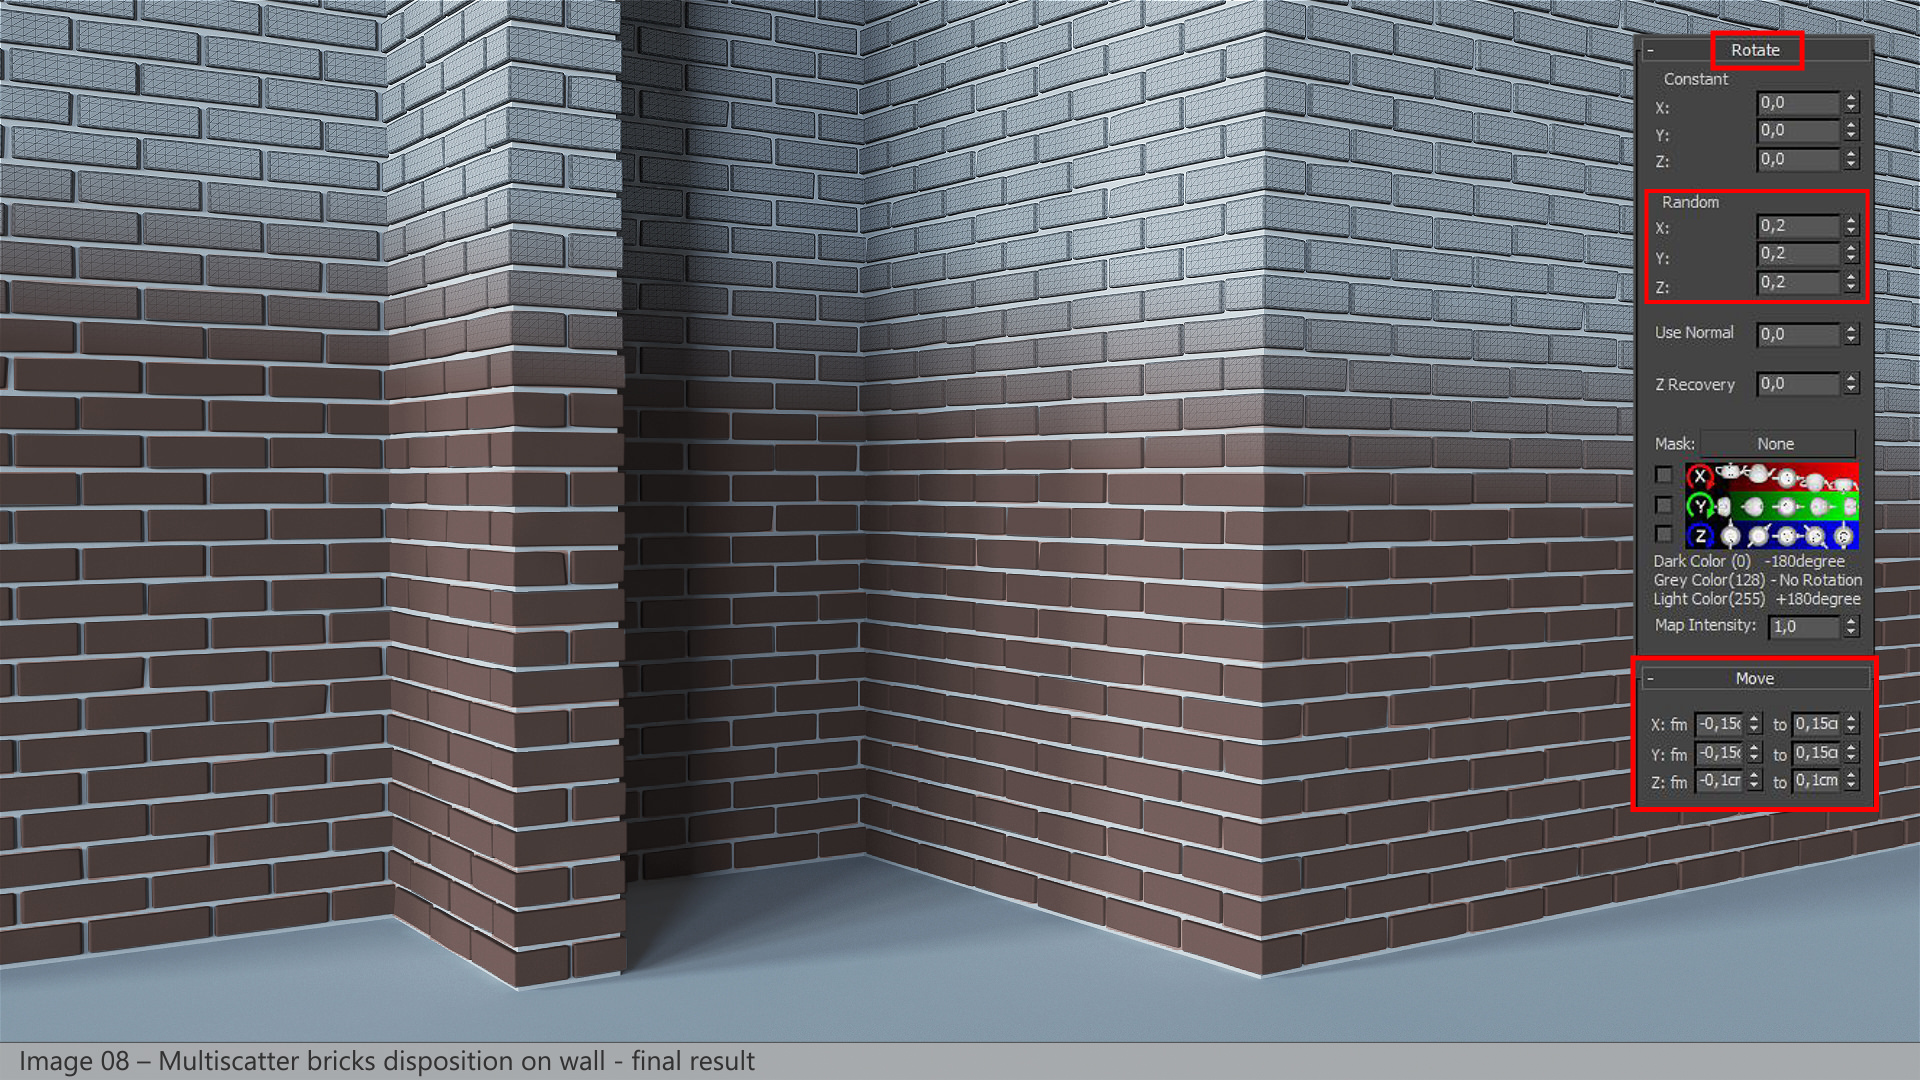 Termitary House - Multiscatter bricks disposition on wall - final result